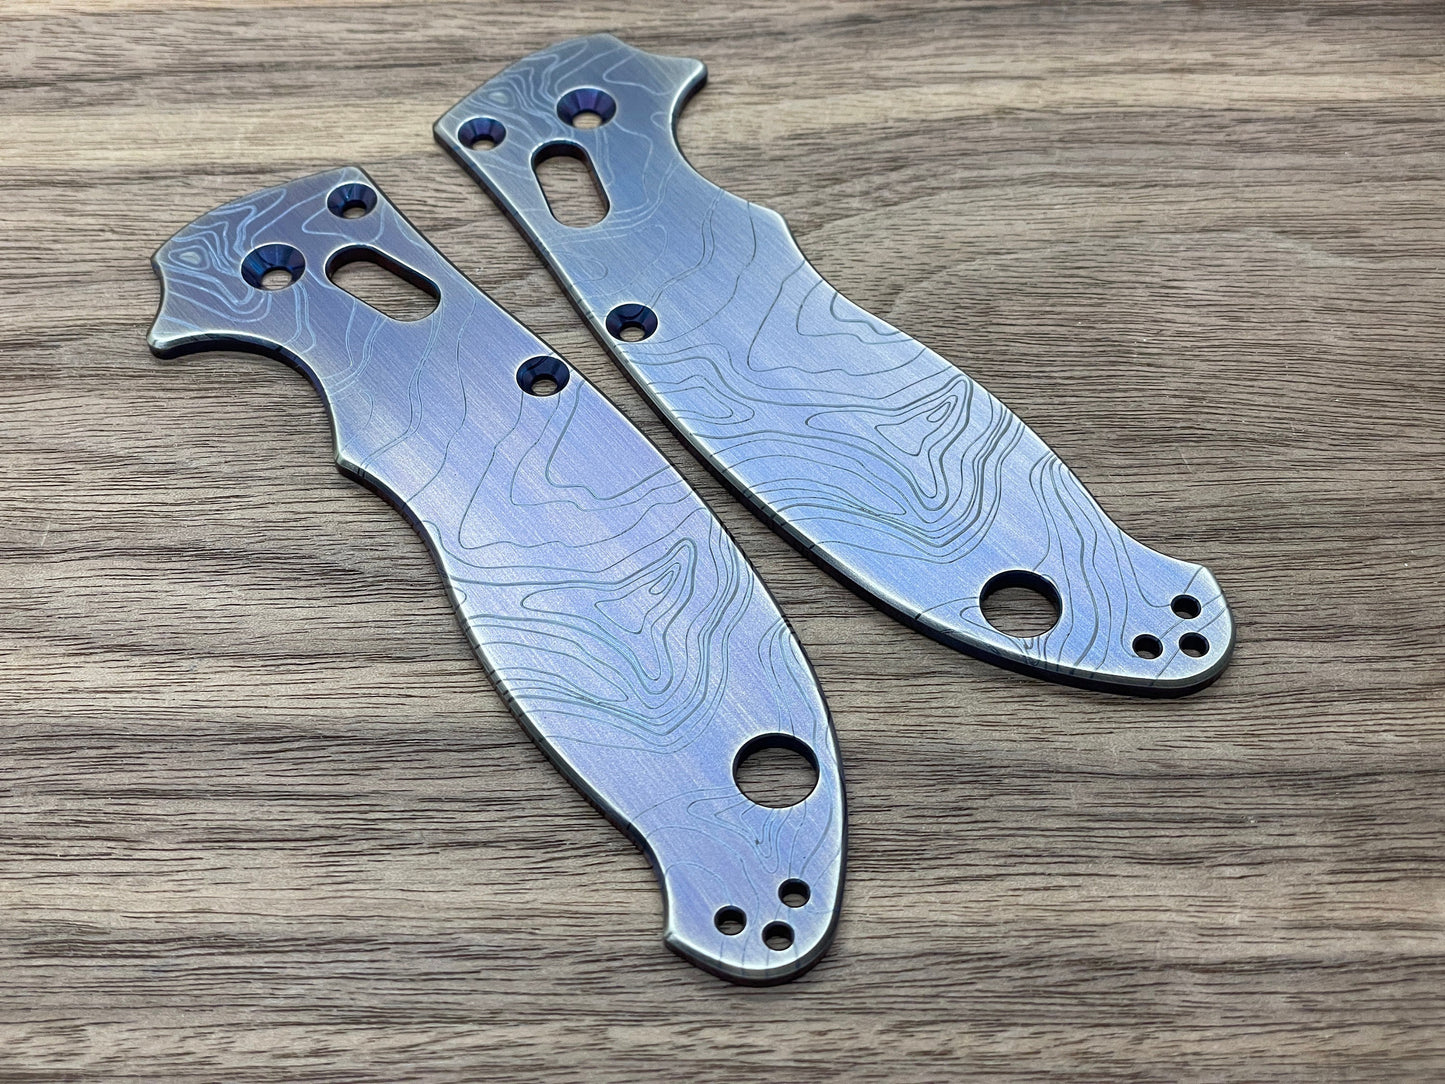 TOPO engraved Blue Ano Brushed Titanium scales for Spyderco MANIX 2